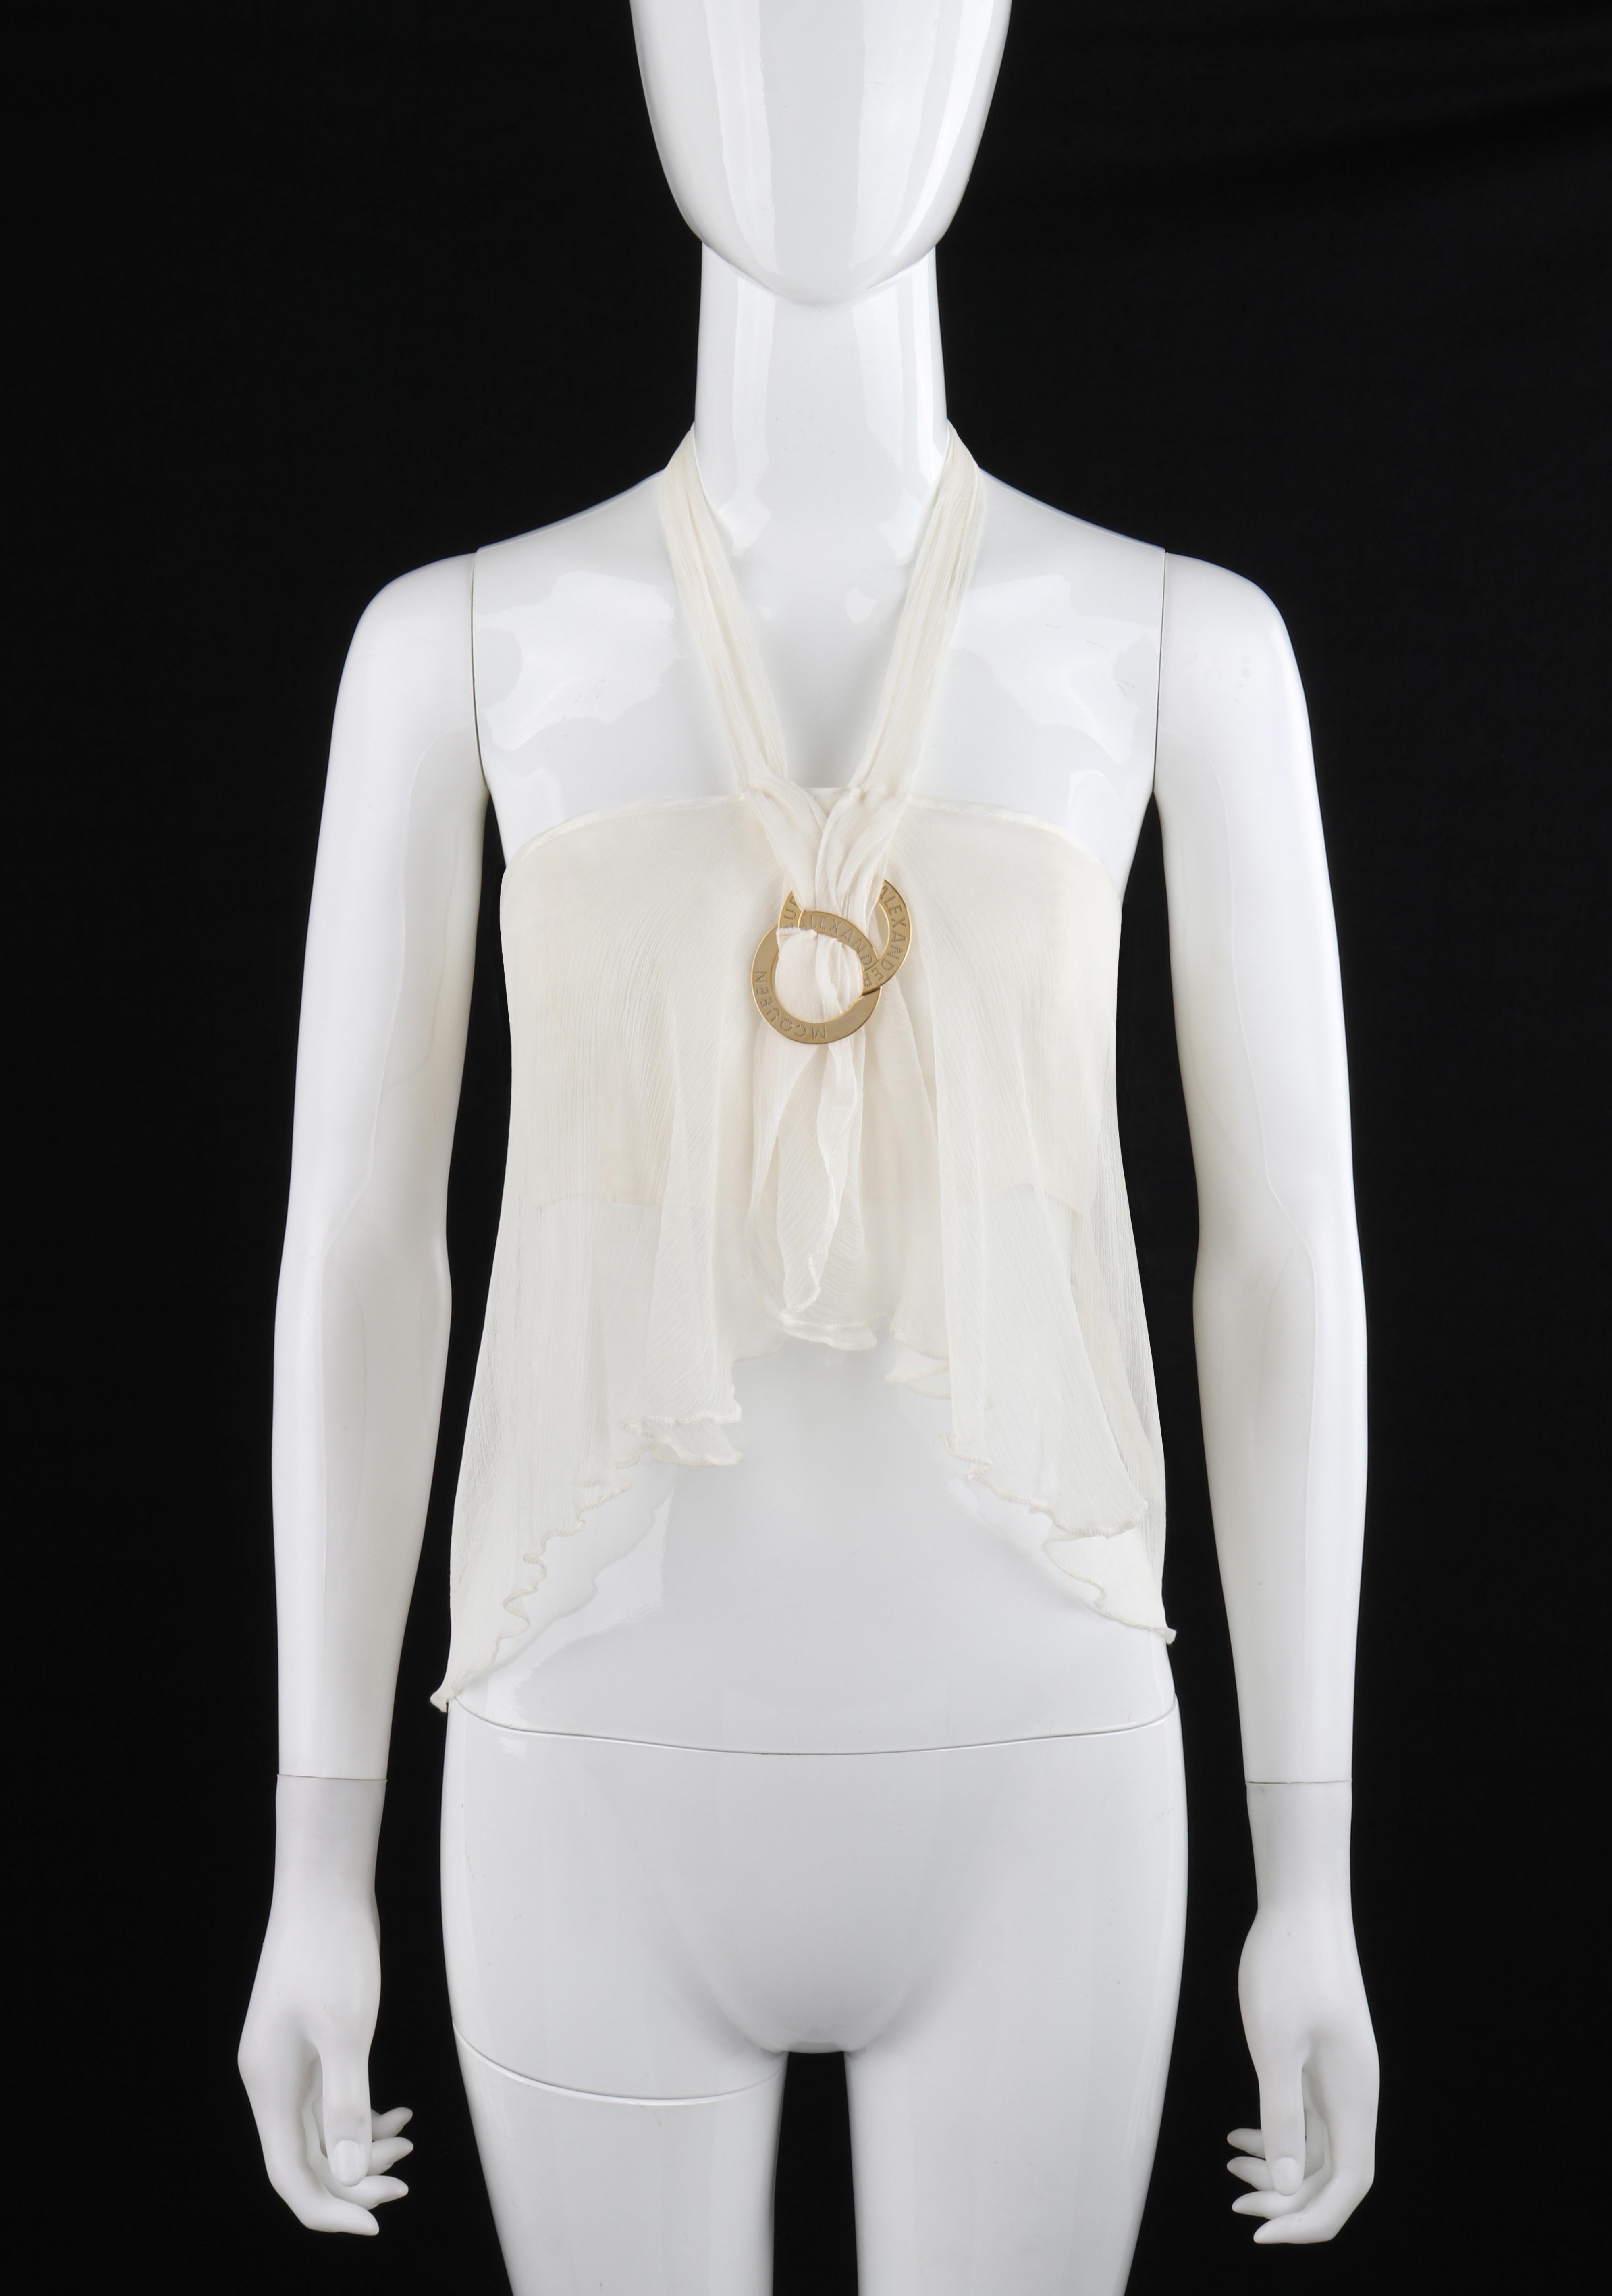 ALEXANDER McQUEEN S/S 1998 White Silk Chiffon Gold Hardware Halter Neck Tank Top NWT
 
Brand / Manufacturer: Alexander McQueen
Collection: S/S 1998 
Style: Halter neck tank top
Color(s): Shades of white and gold
Lined: Yes
Marked Fabric Content: